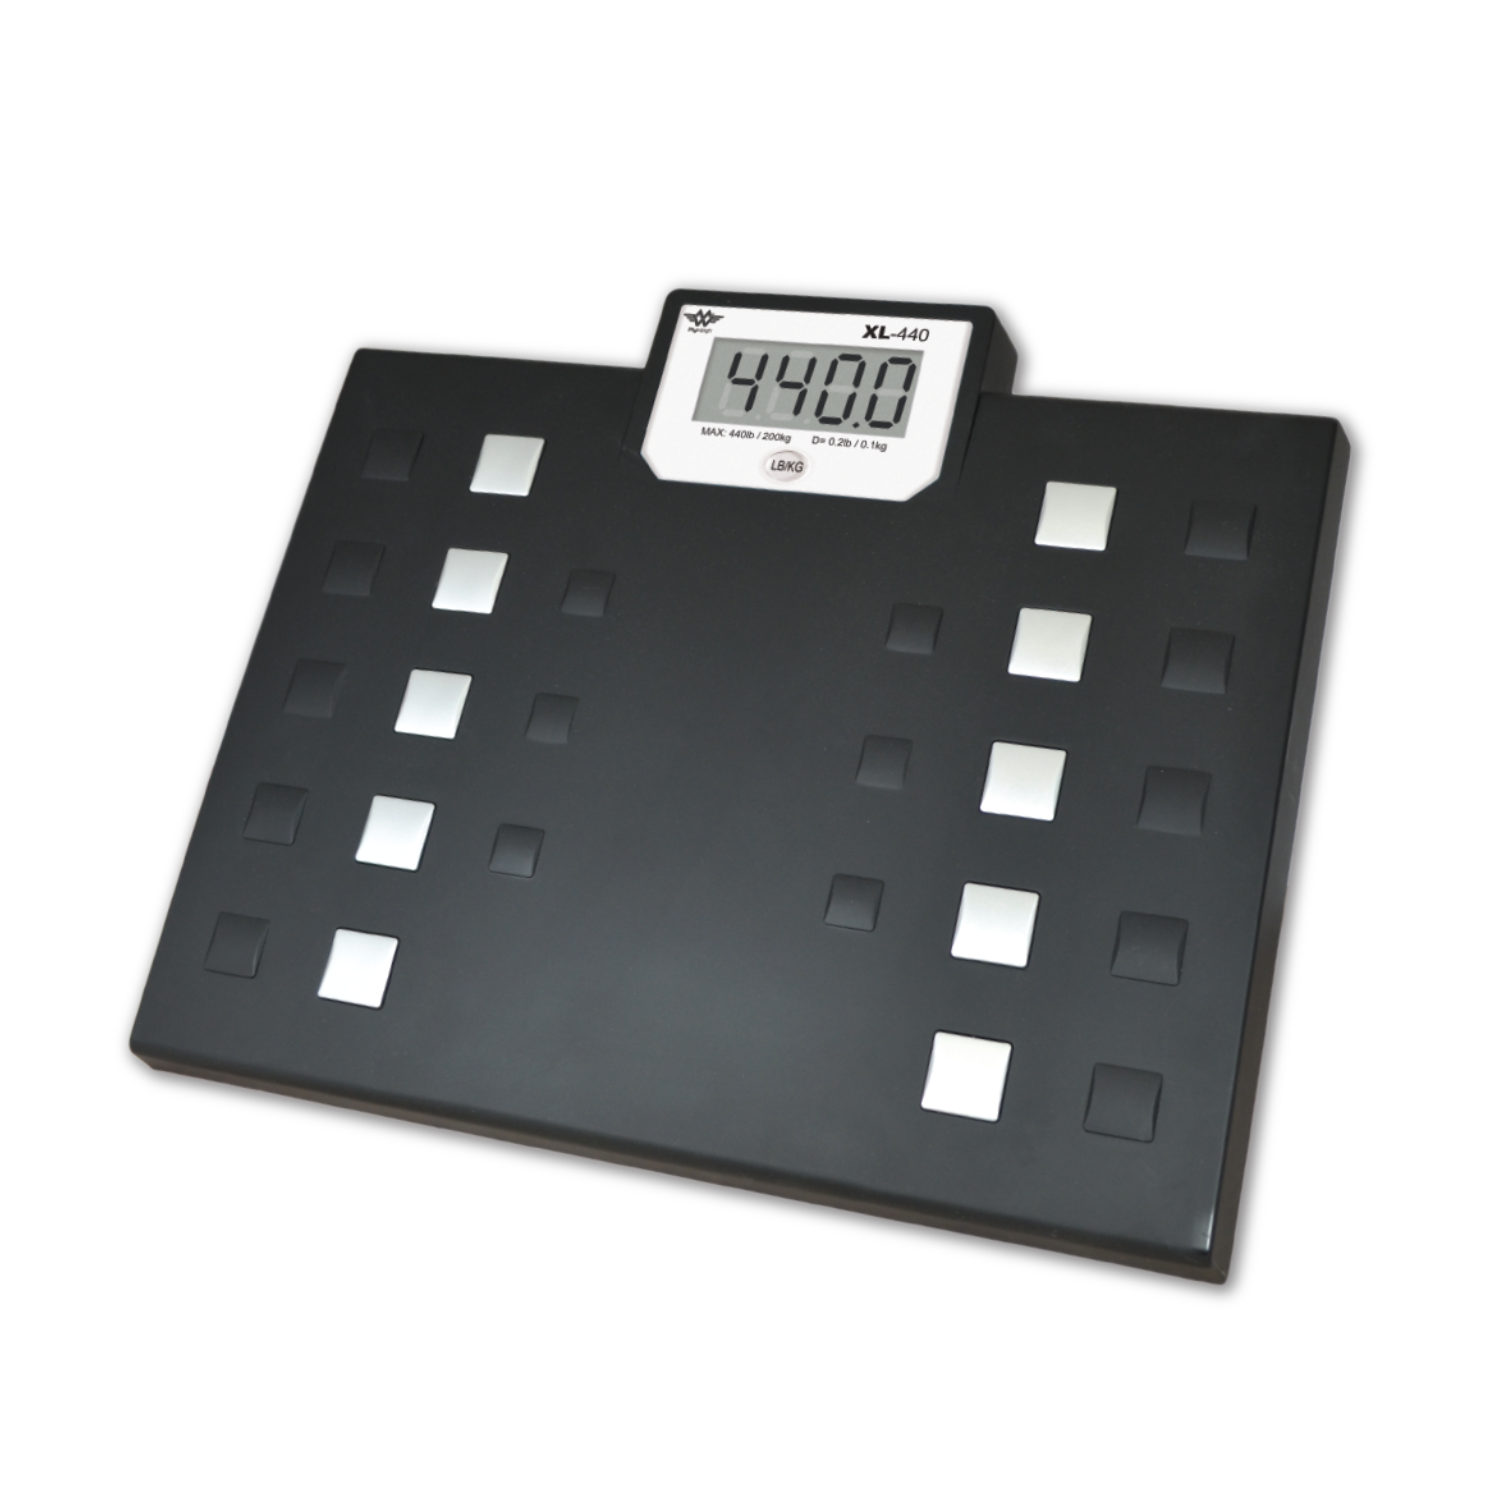 Image of XL-440 talking bathroom scale from MyWeigh